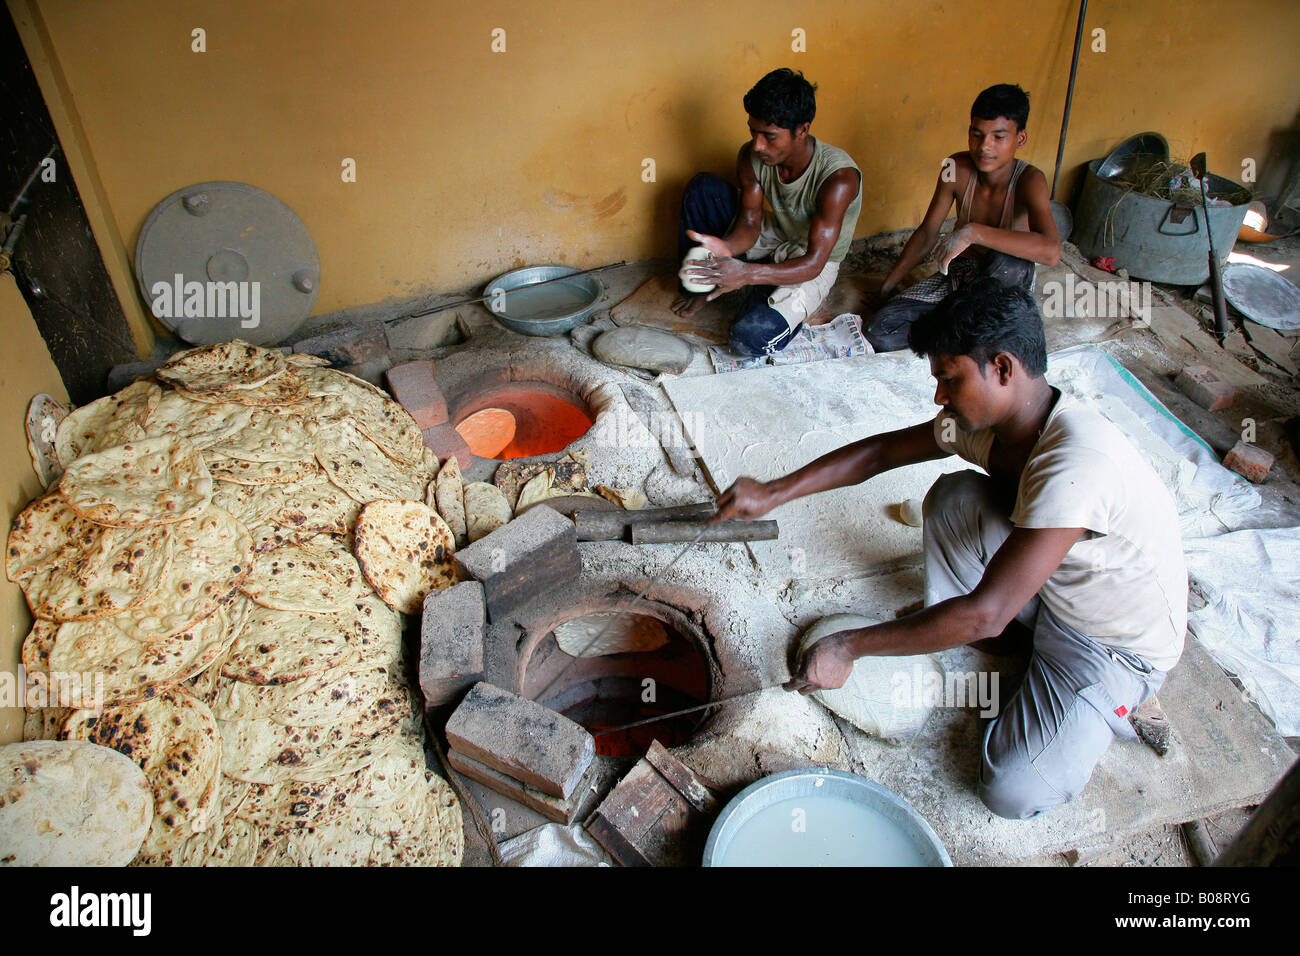 Man taking naan bread out of an oven, Bareilly, Uttar Pradesh, India, Asia Stock Photo